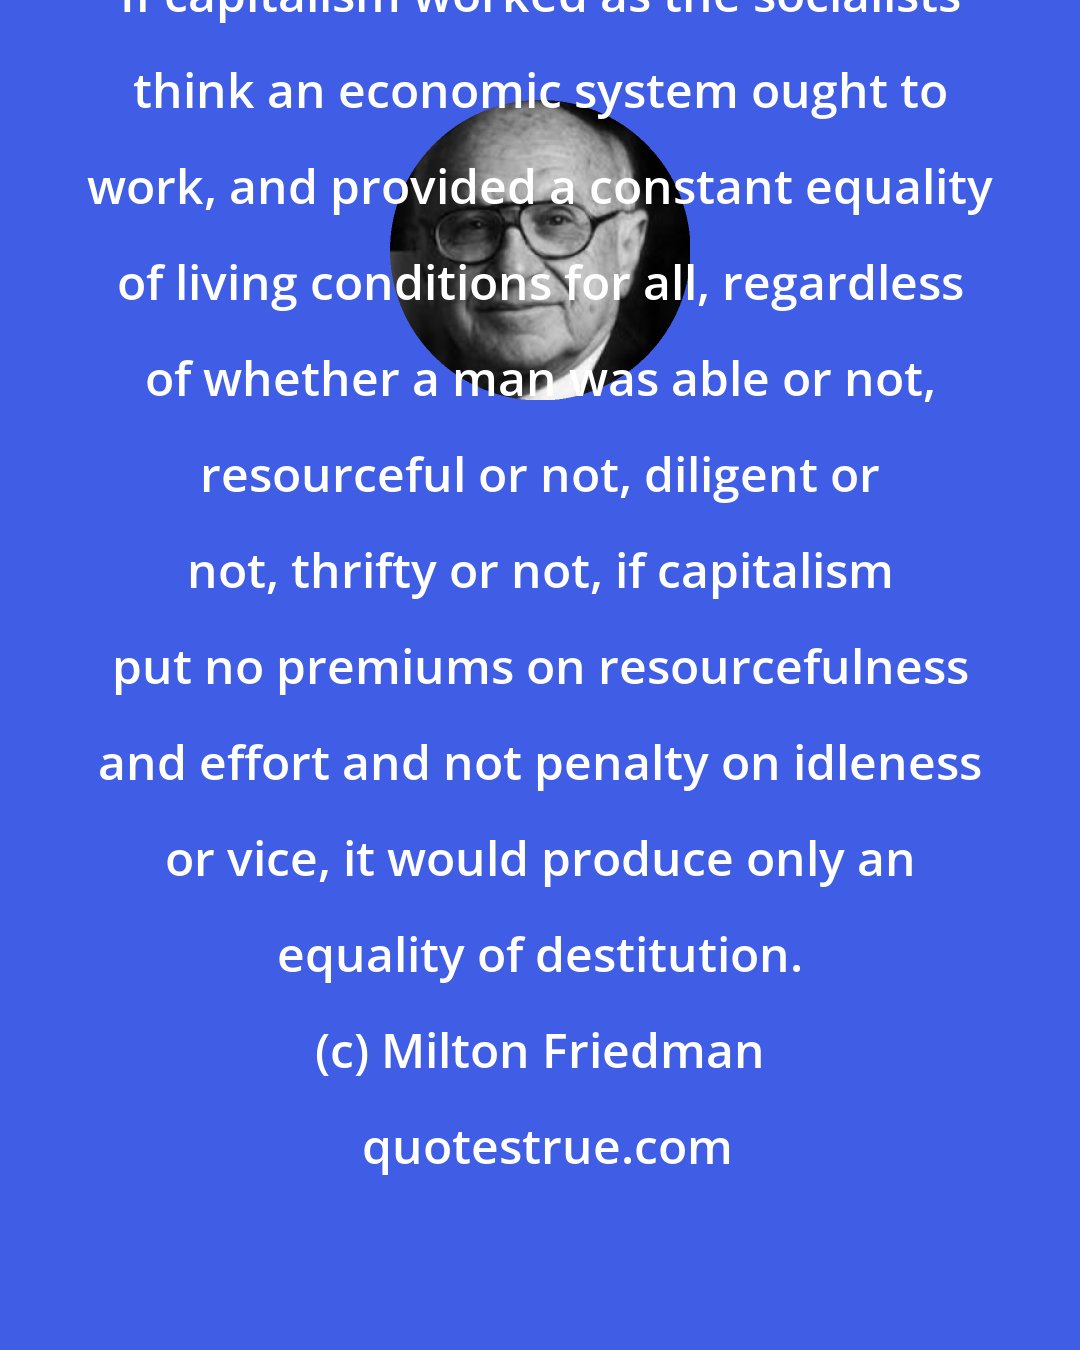 Milton Friedman: If capitalism worked as the socialists think an economic system ought to work, and provided a constant equality of living conditions for all, regardless of whether a man was able or not, resourceful or not, diligent or not, thrifty or not, if capitalism put no premiums on resourcefulness and effort and not penalty on idleness or vice, it would produce only an equality of destitution.